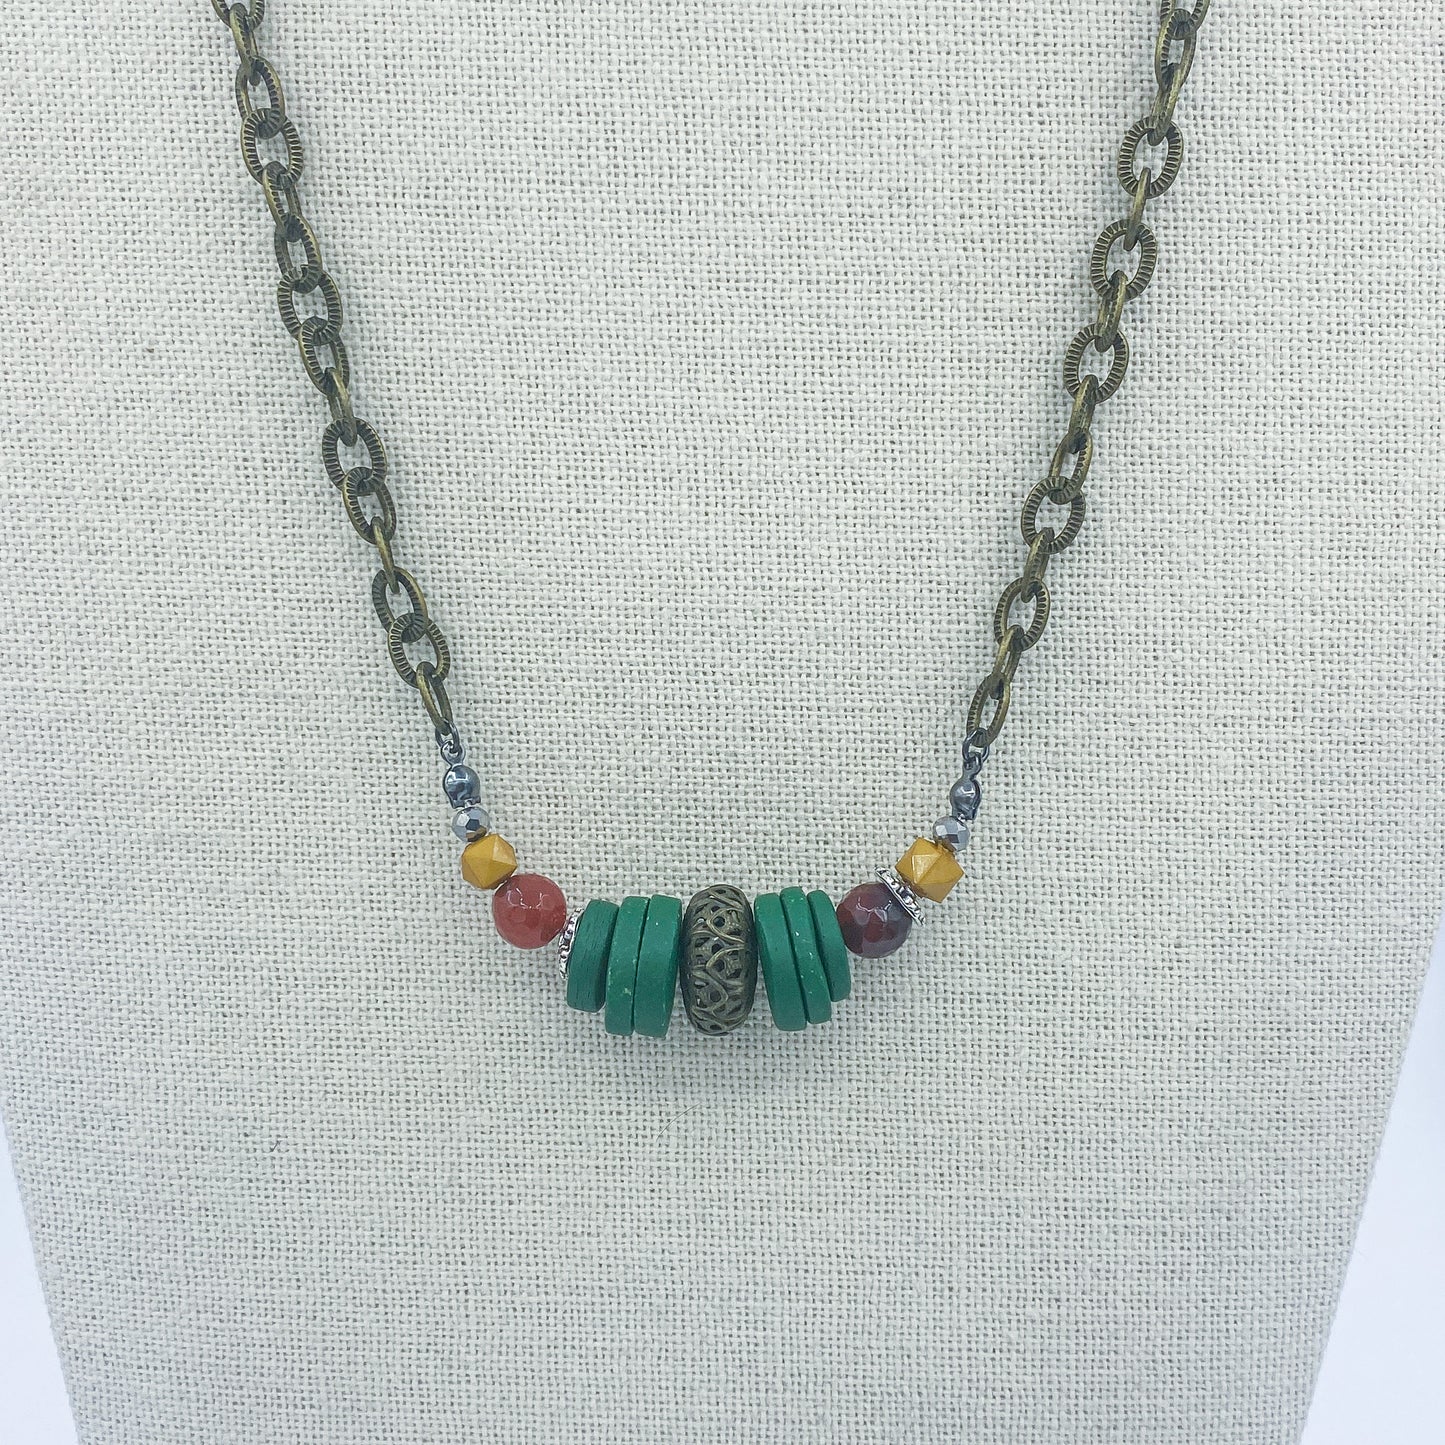 HANDMADE STACKED STONE DISCS ON CHAIN NECKLACE